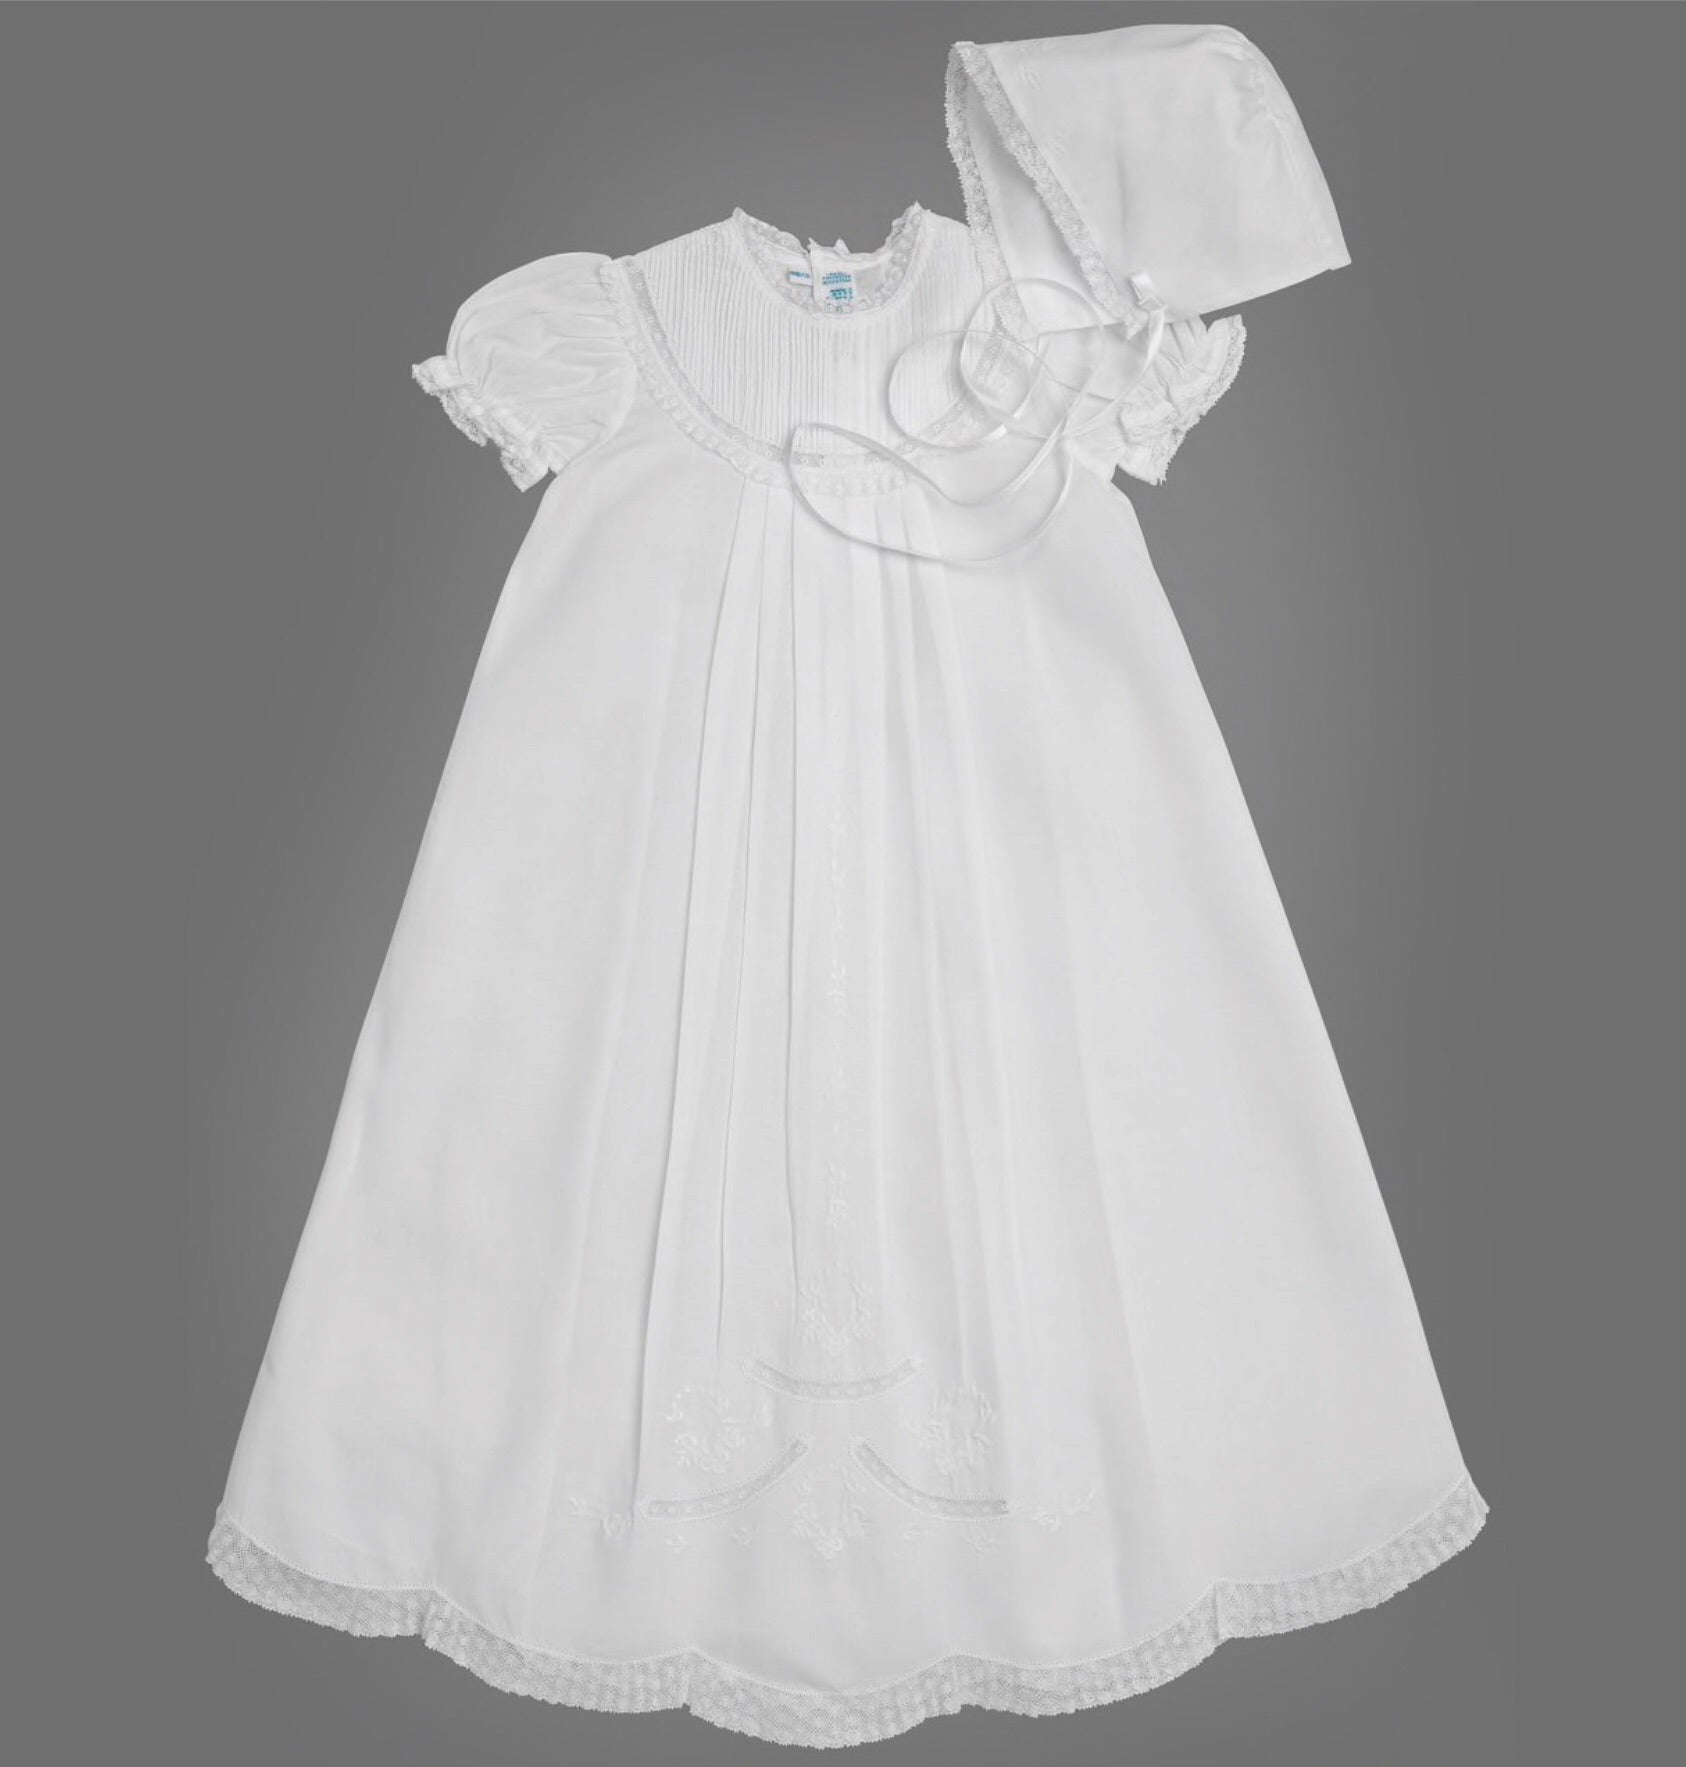 Pintucked Yoke Special Occasion Set for Girls  - Doodlebug's Children's Boutique